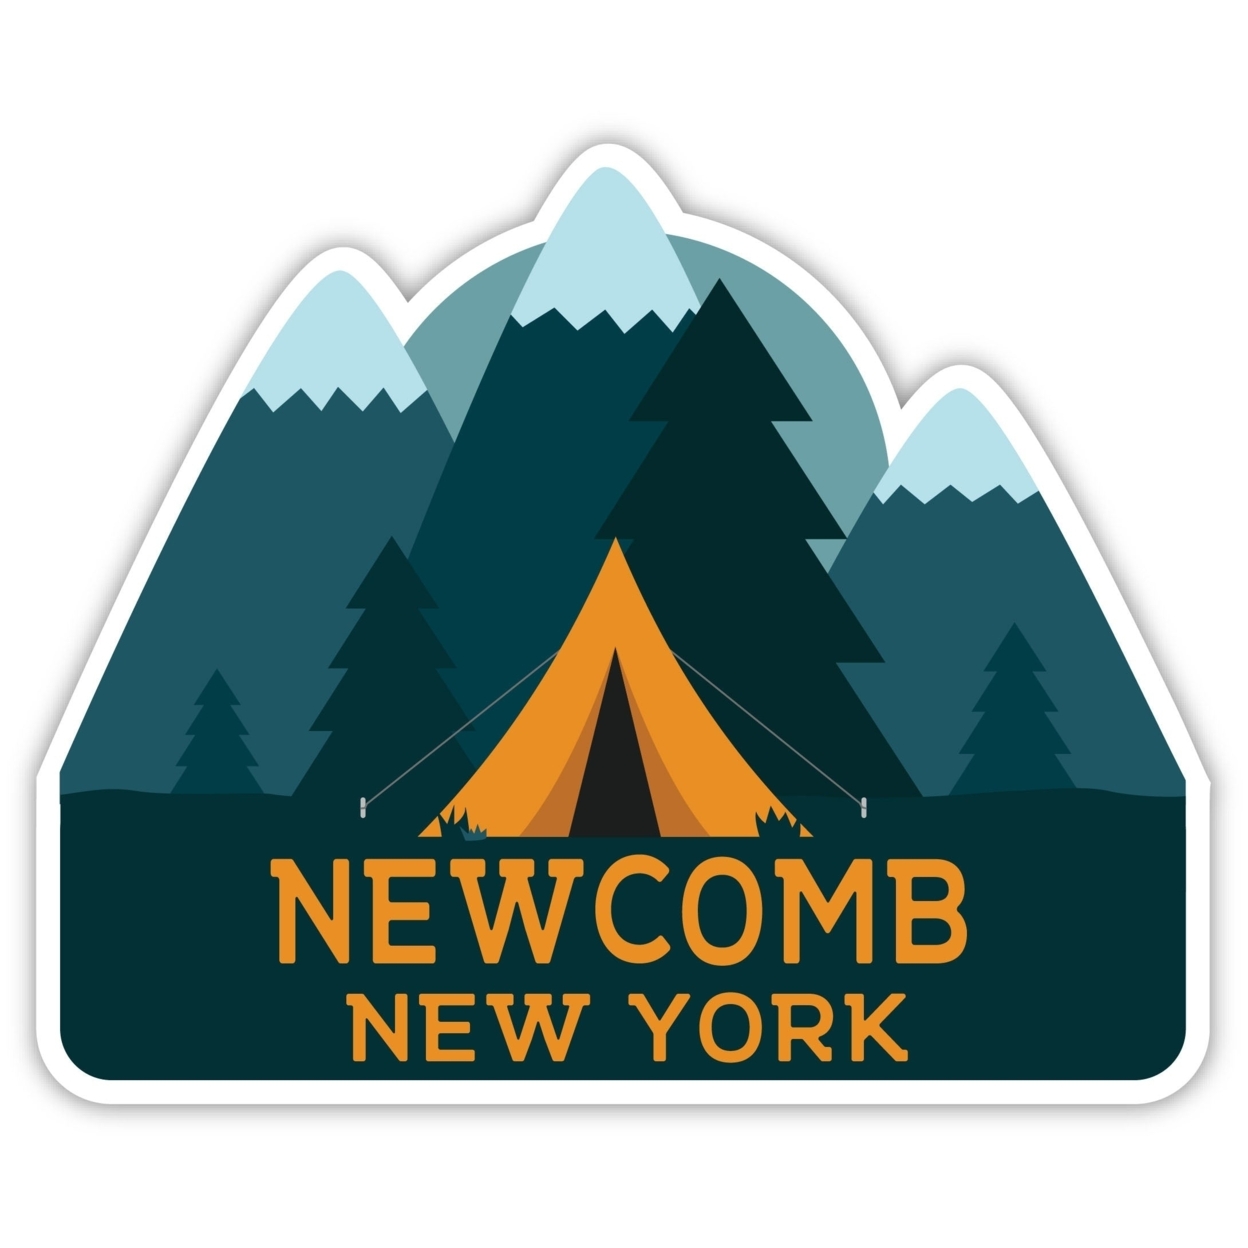 Newcomb New York Souvenir Decorative Stickers (Choose Theme And Size) - Single Unit, 2-Inch, Tent